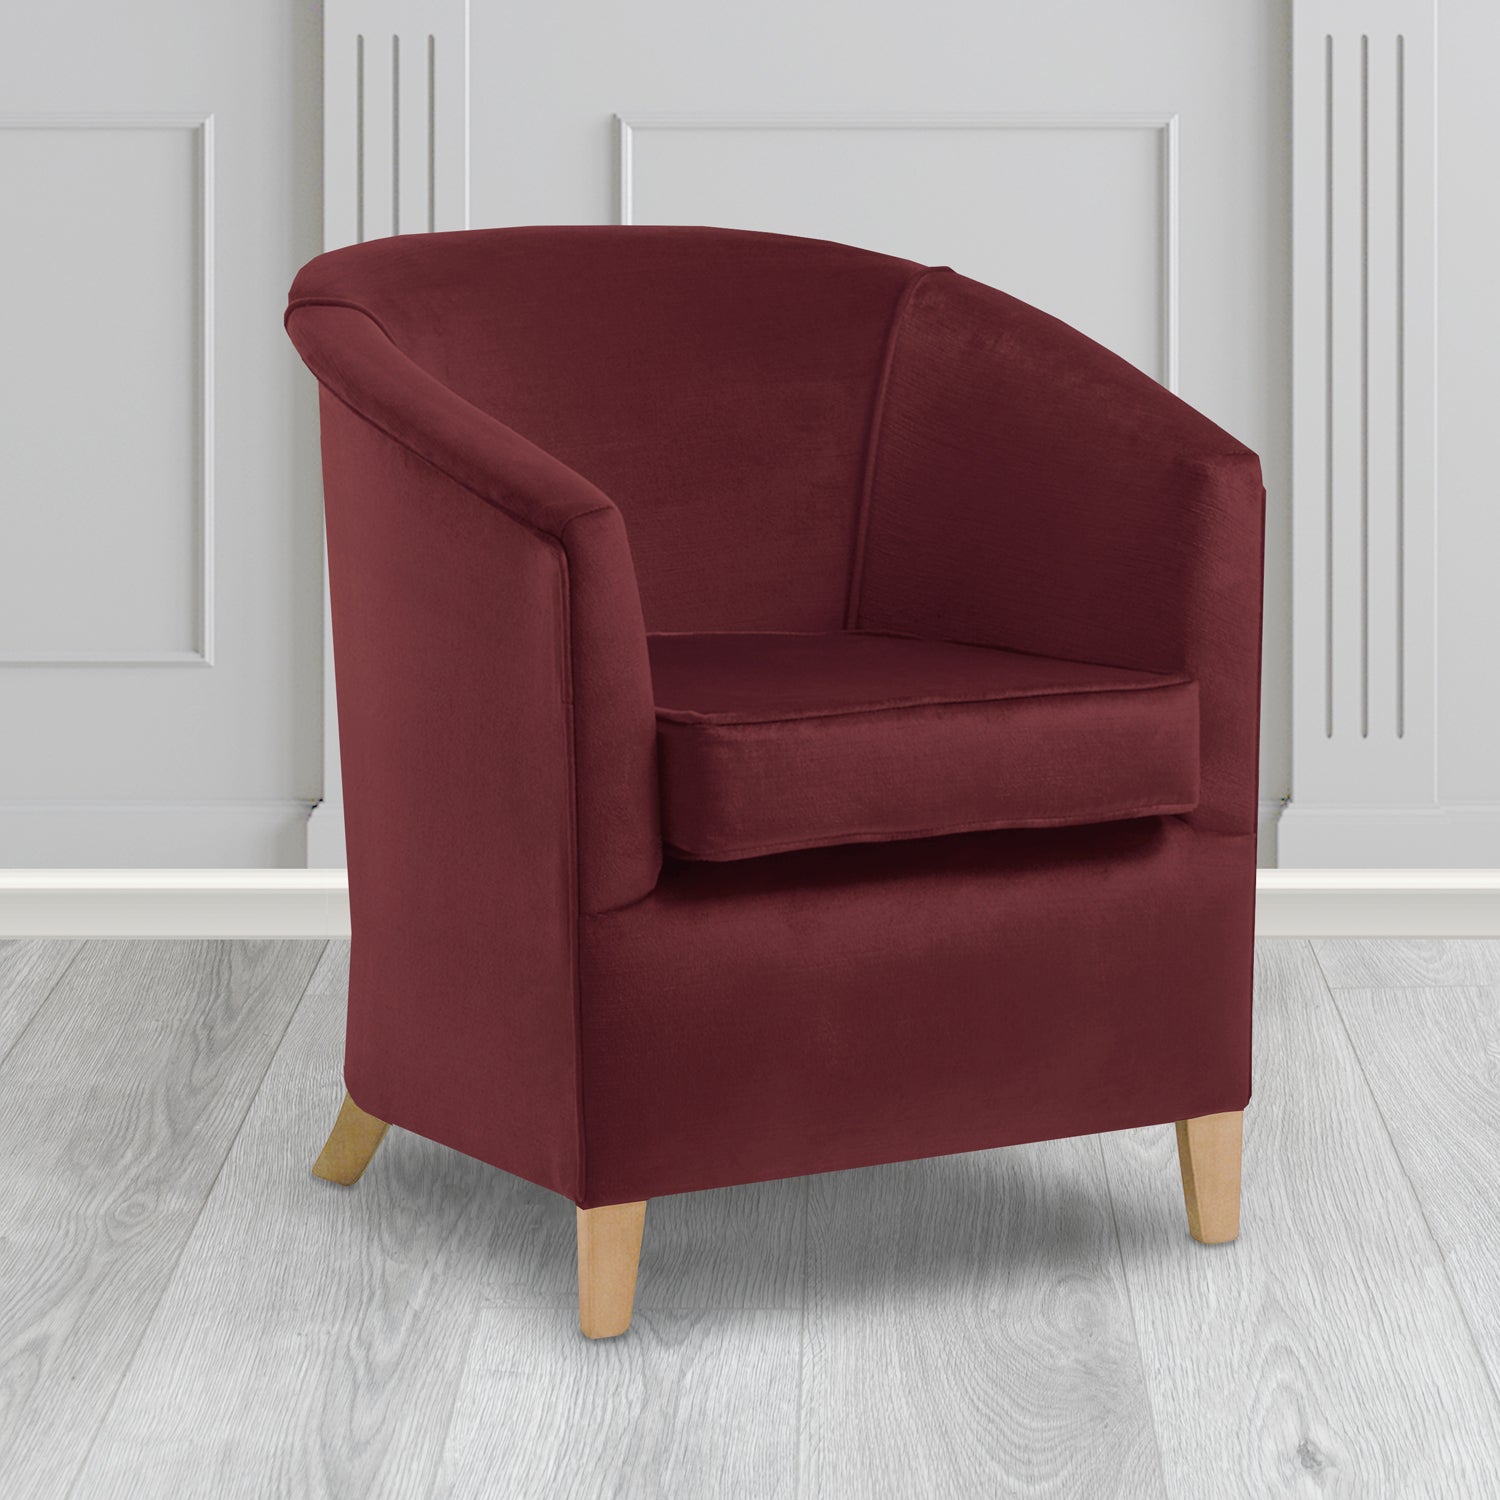 Jasmine Tub Chair in Noble 414 Wine Crib 5 Velvet Fabric - Water Resistant - The Tub Chair Shop